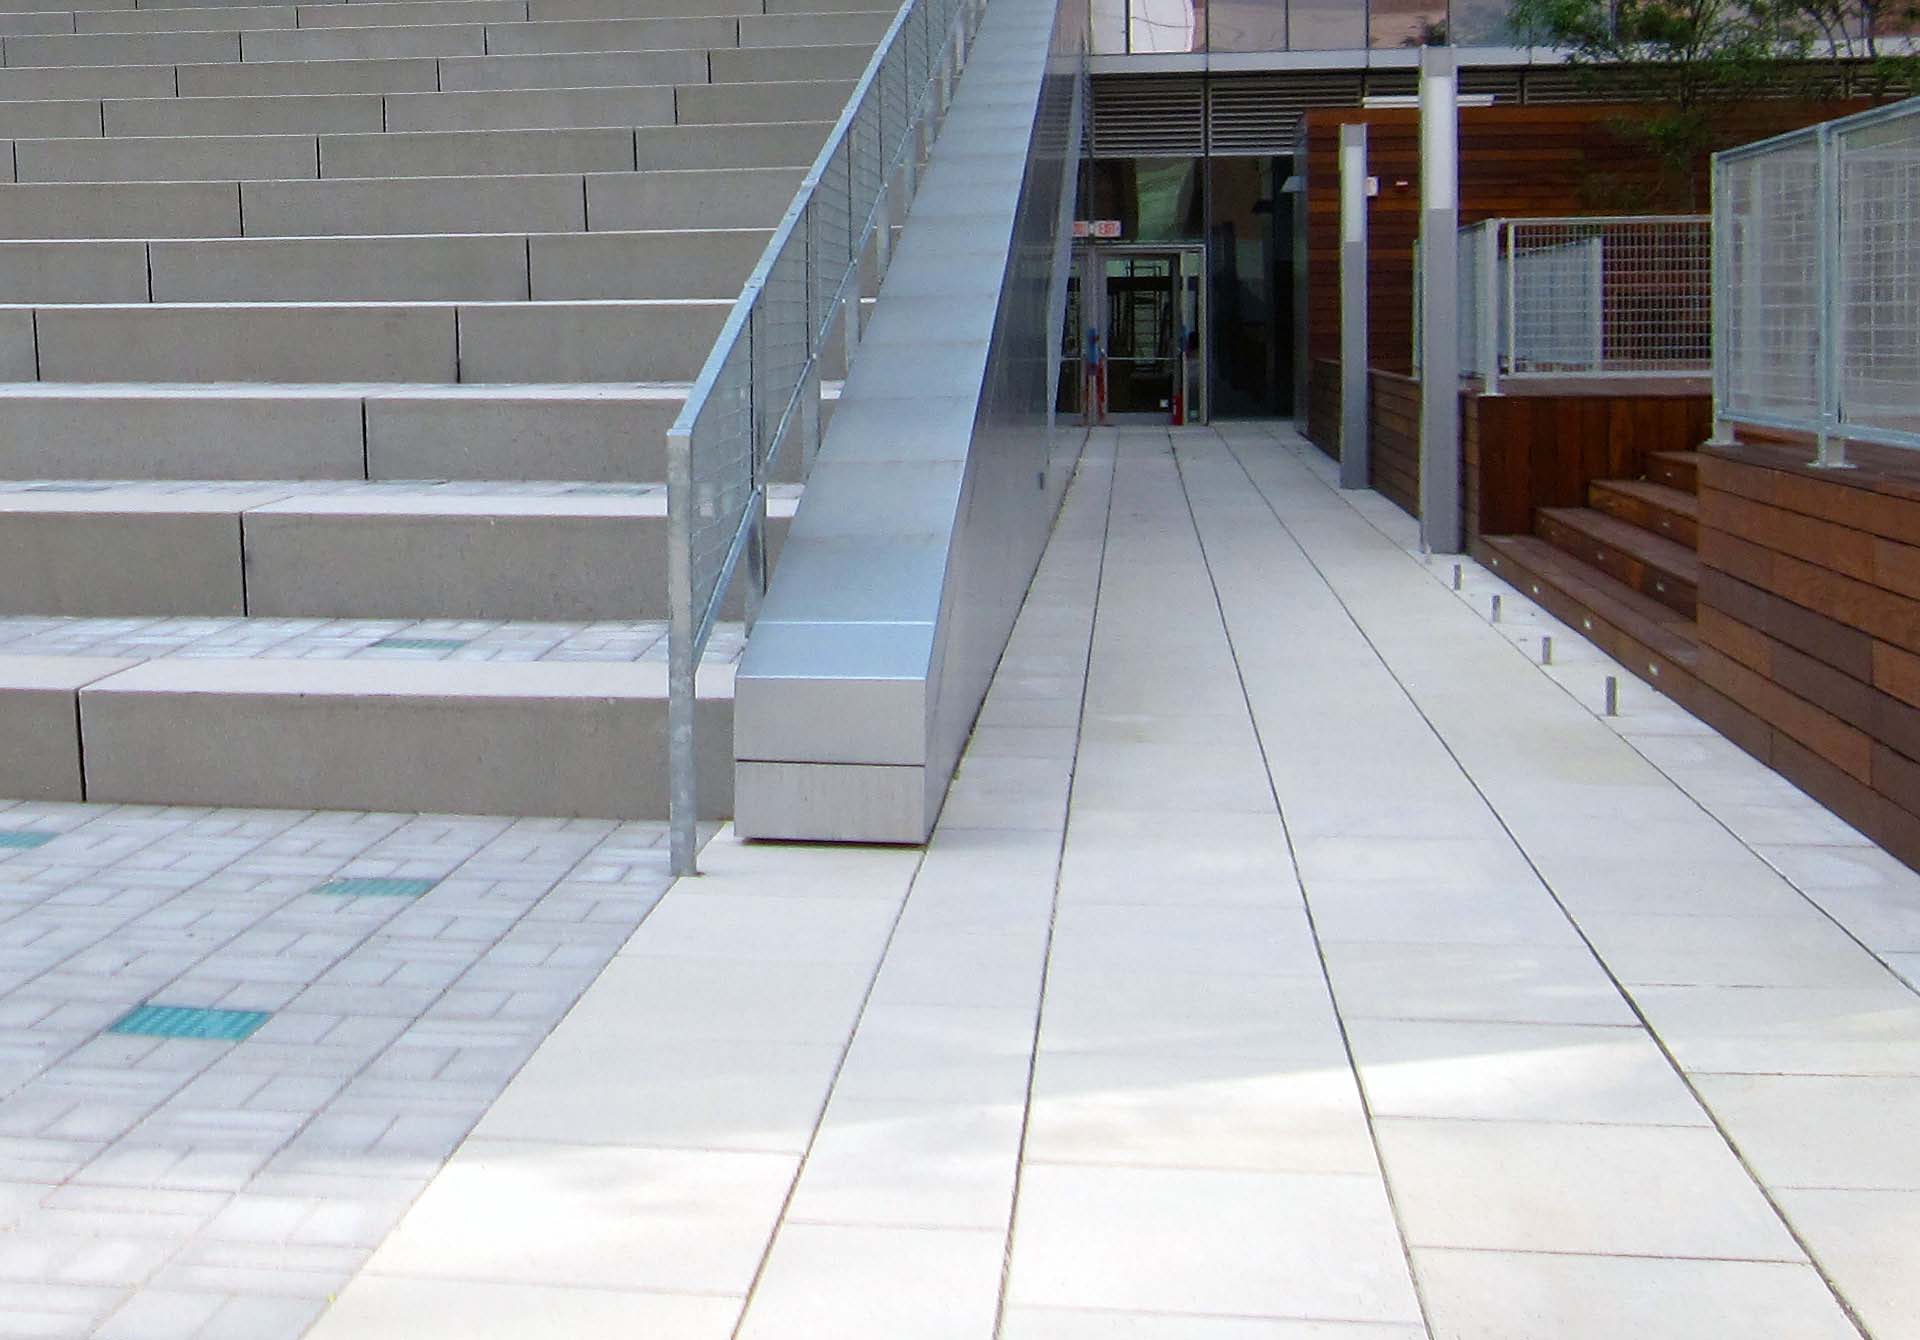 Manufacturer of Commercial Building Architectural Pavers for Entryways